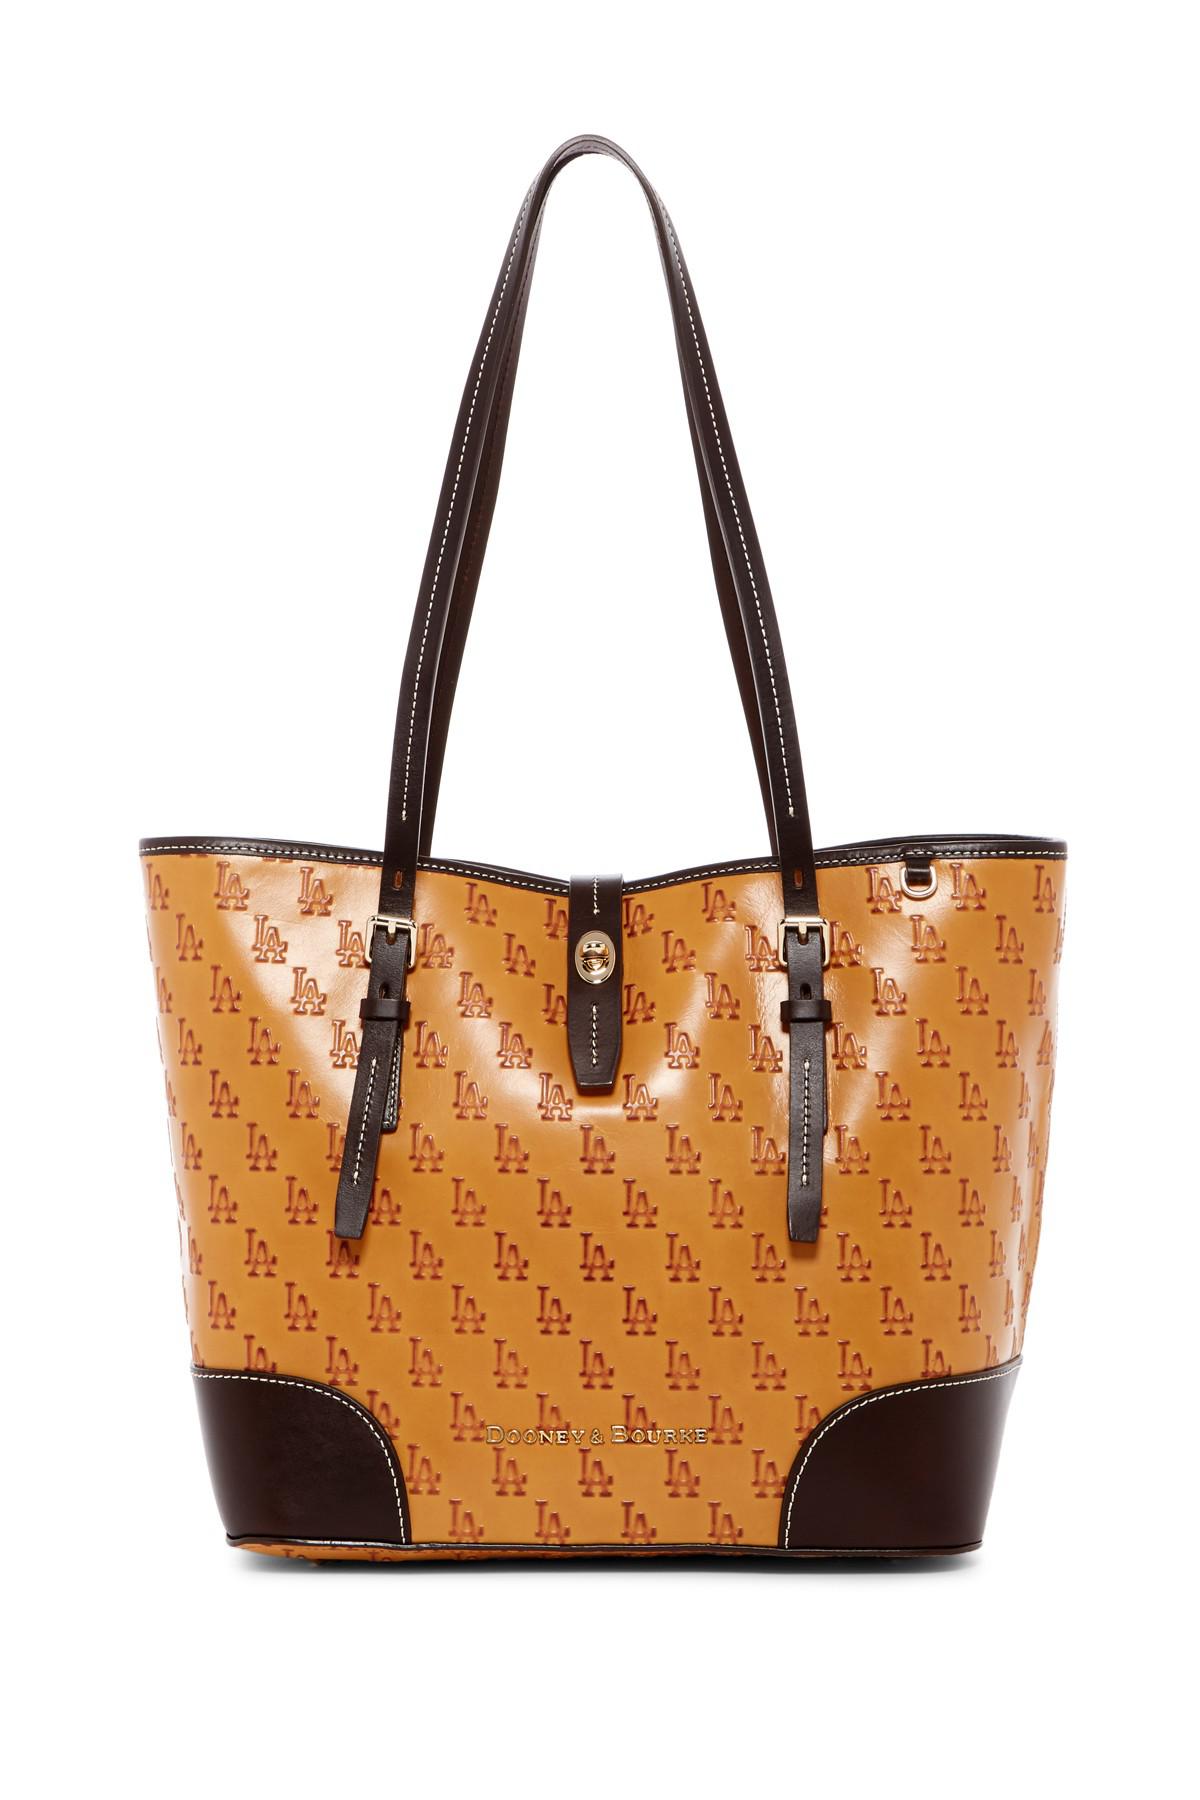 Dooney & Bourke Los Angeles Dodgers Leather Shopper Tote in Brown